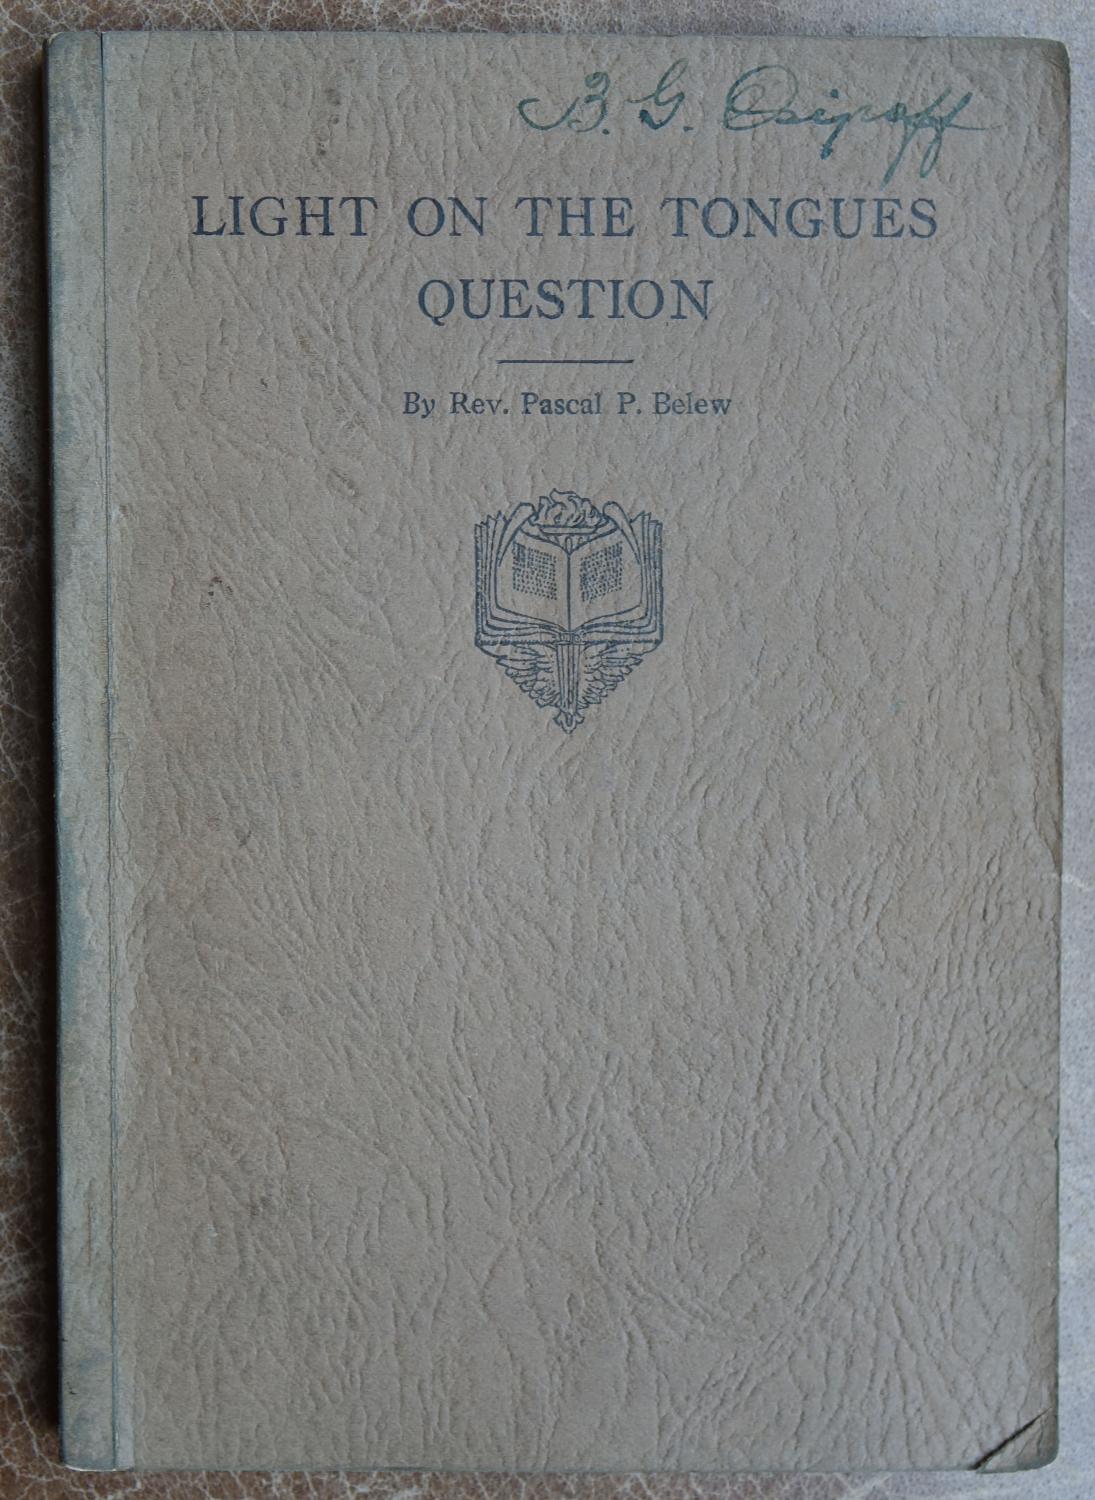 Ten hard questions about speaking in tongues (glossolalia and xenoglossy)